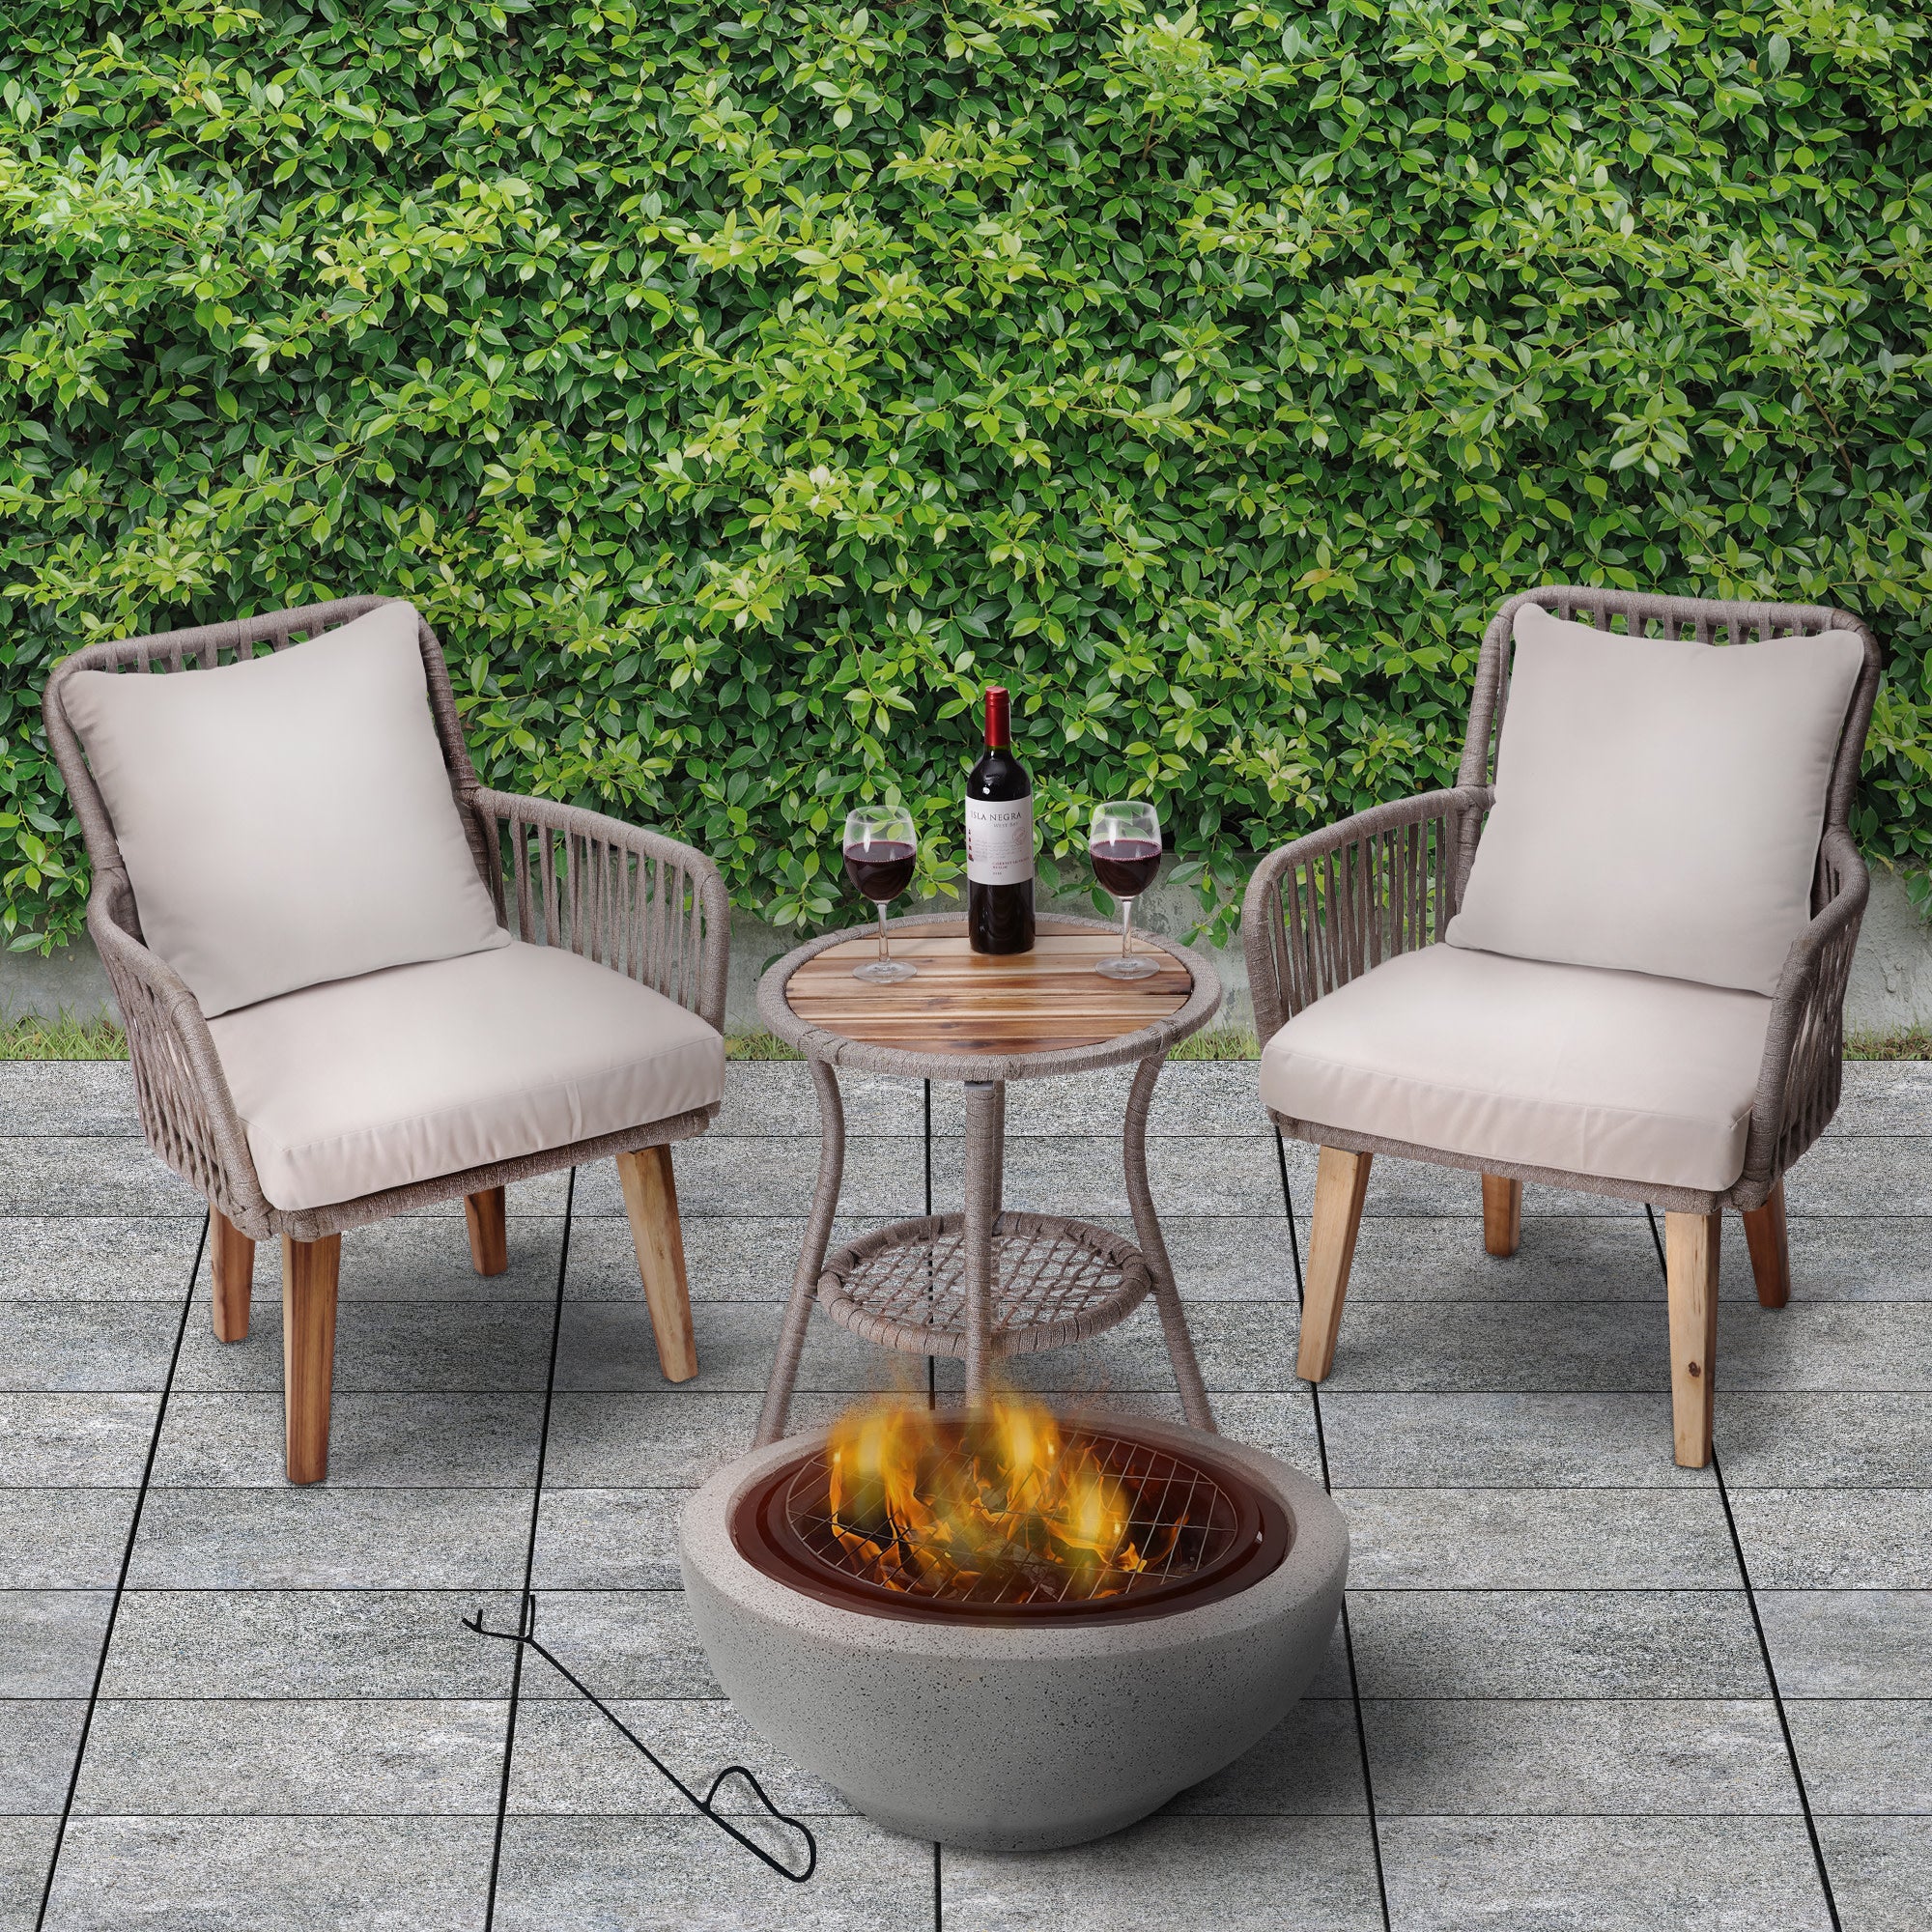 Peaktop Outdoor 24" Wood Burning Fire Pit with Decorative Concrete Base, Gray